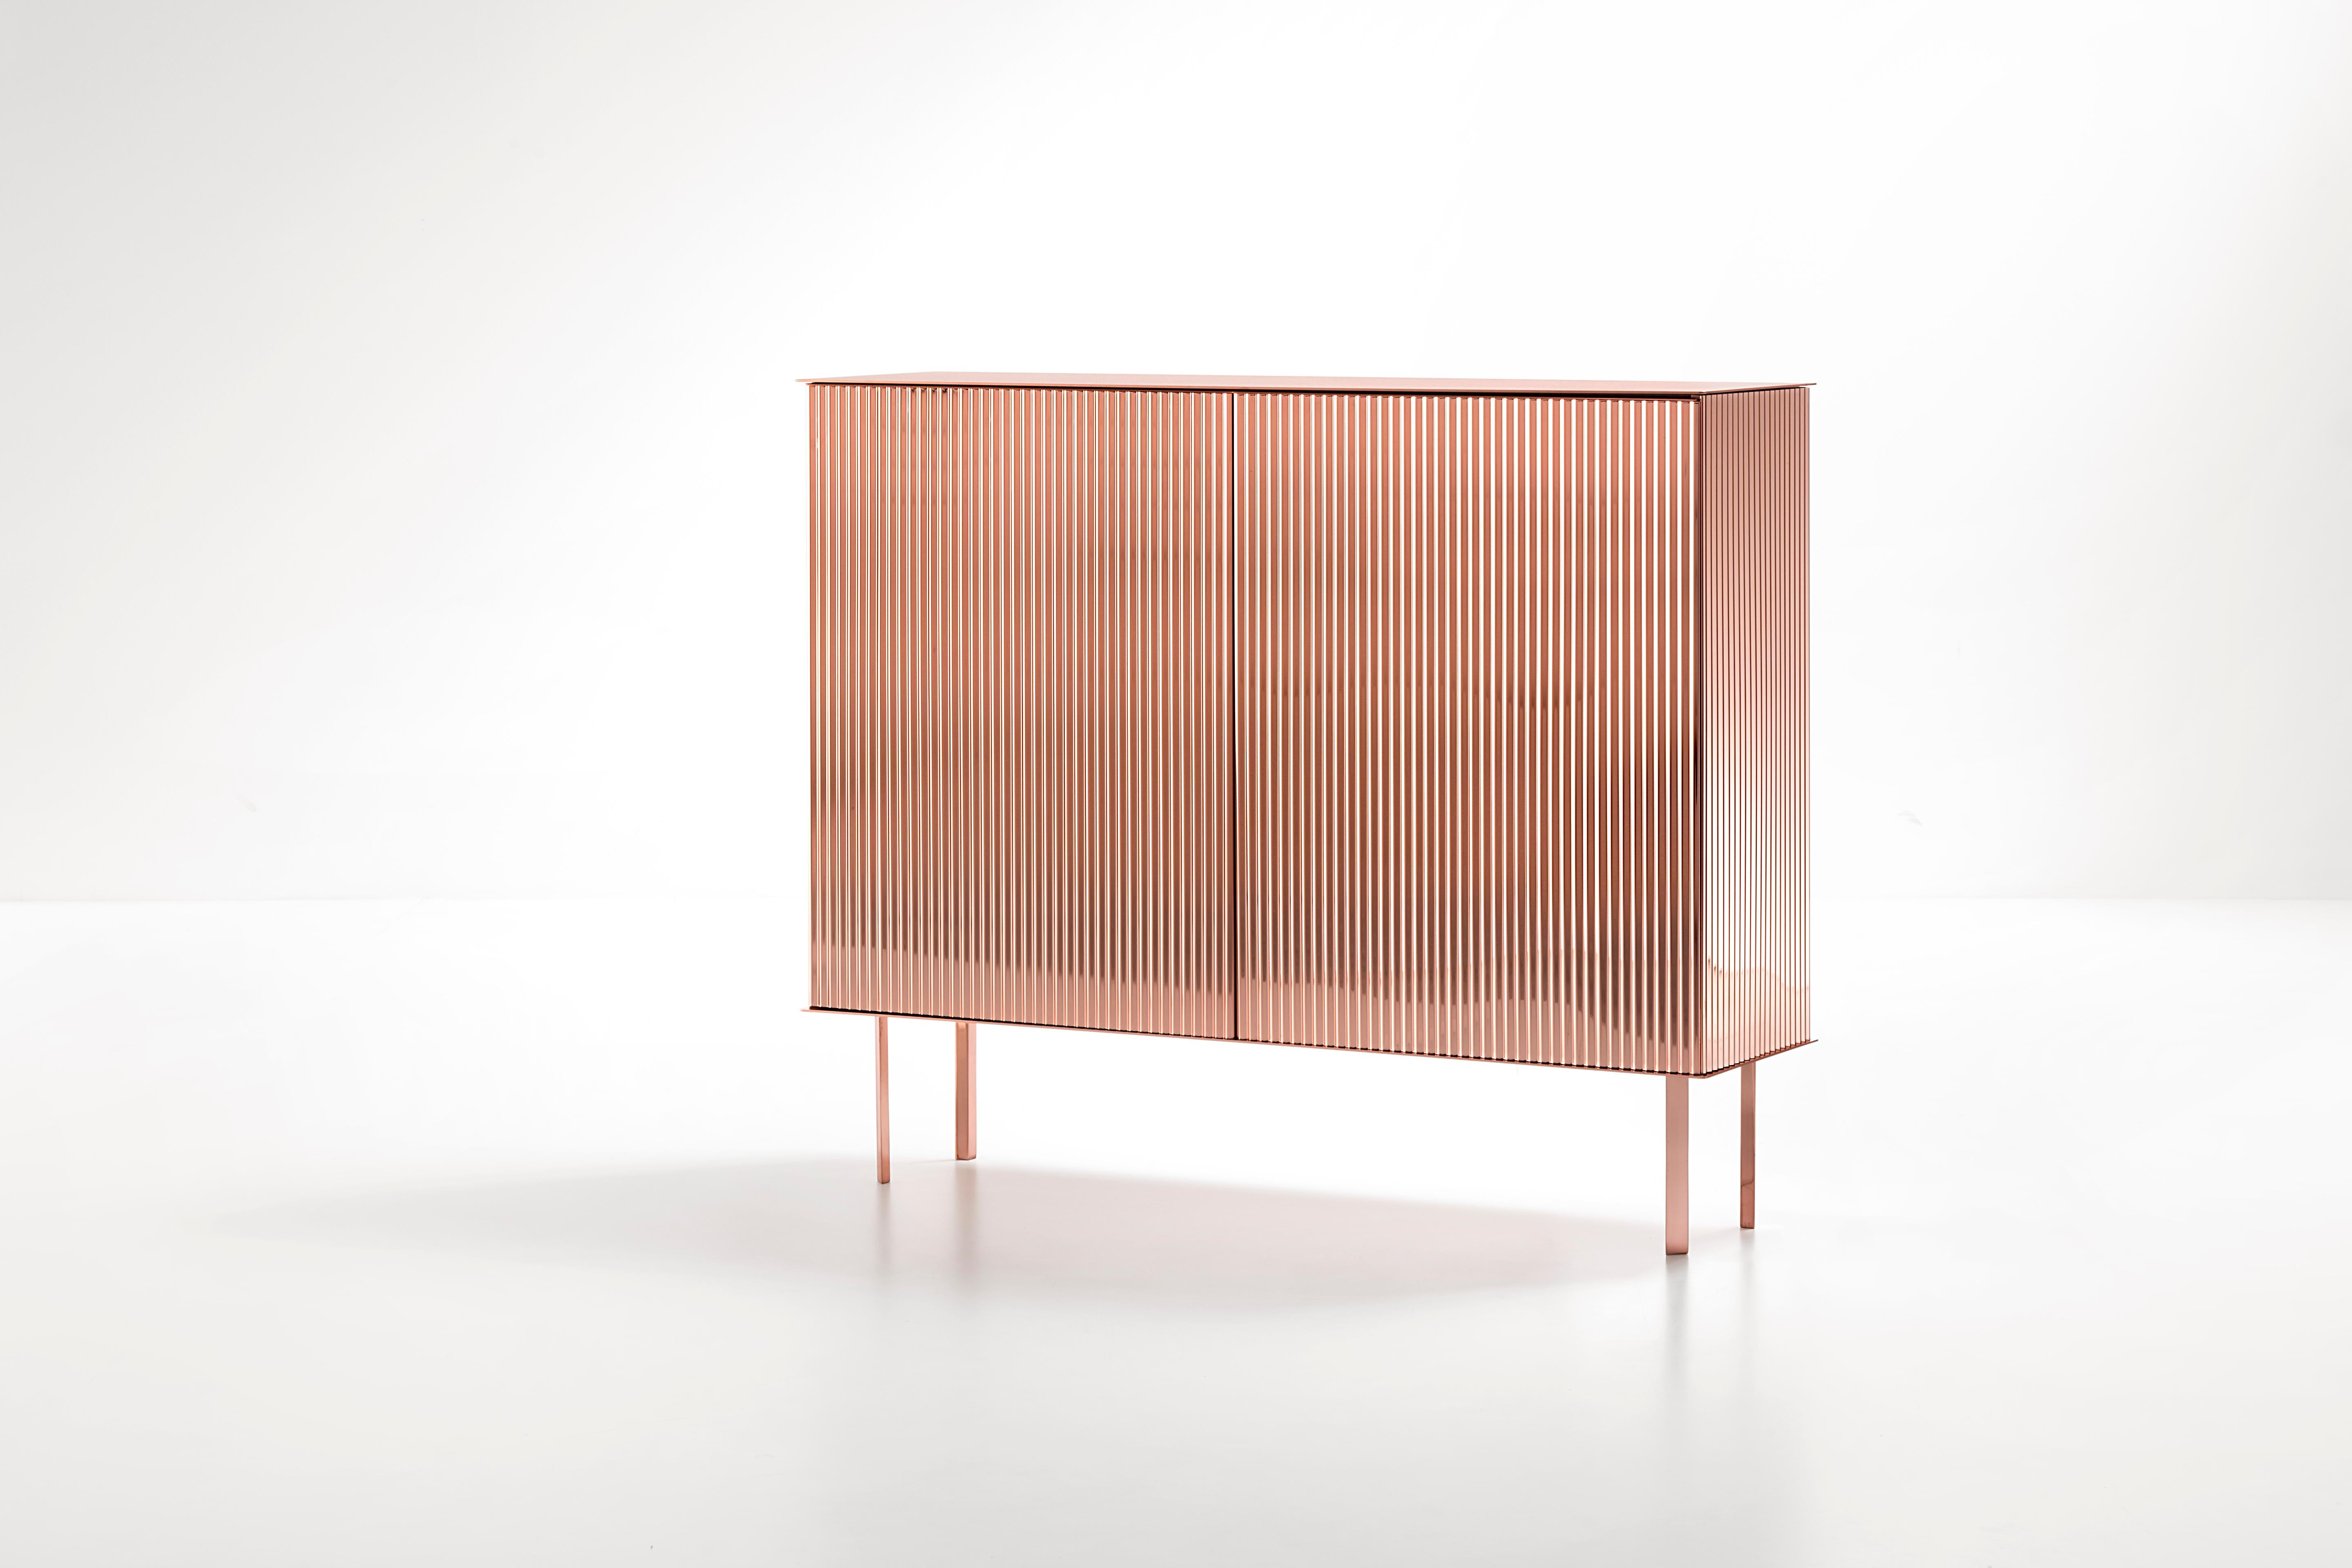 Like a ballerina on her toes, Elizabeth gracefully unfurls her luminous dress, as if made of pleated fabric. The characteristic folds add movement to the metal sheet along the surface of the cabinet, transforming each reflection into light. In an